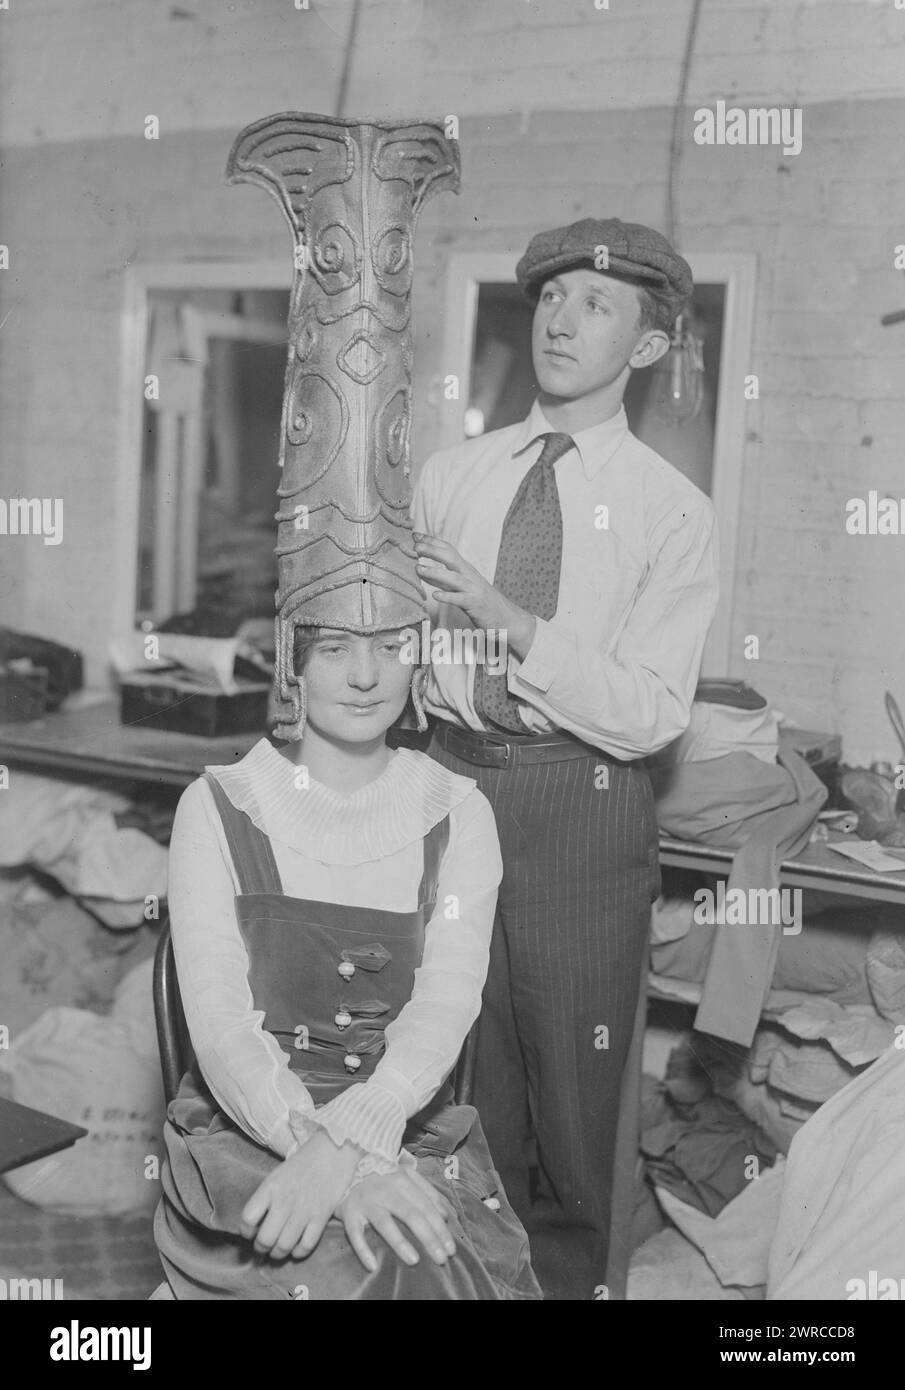 Margaret Mower, Photograph shows young man putting a tall headdress on actress Margaret Mower, possibly for a performance of 'The Laughter of the Gods', back stage in a theater., 1919, Glass negatives, 1 negative: glass Stock Photo